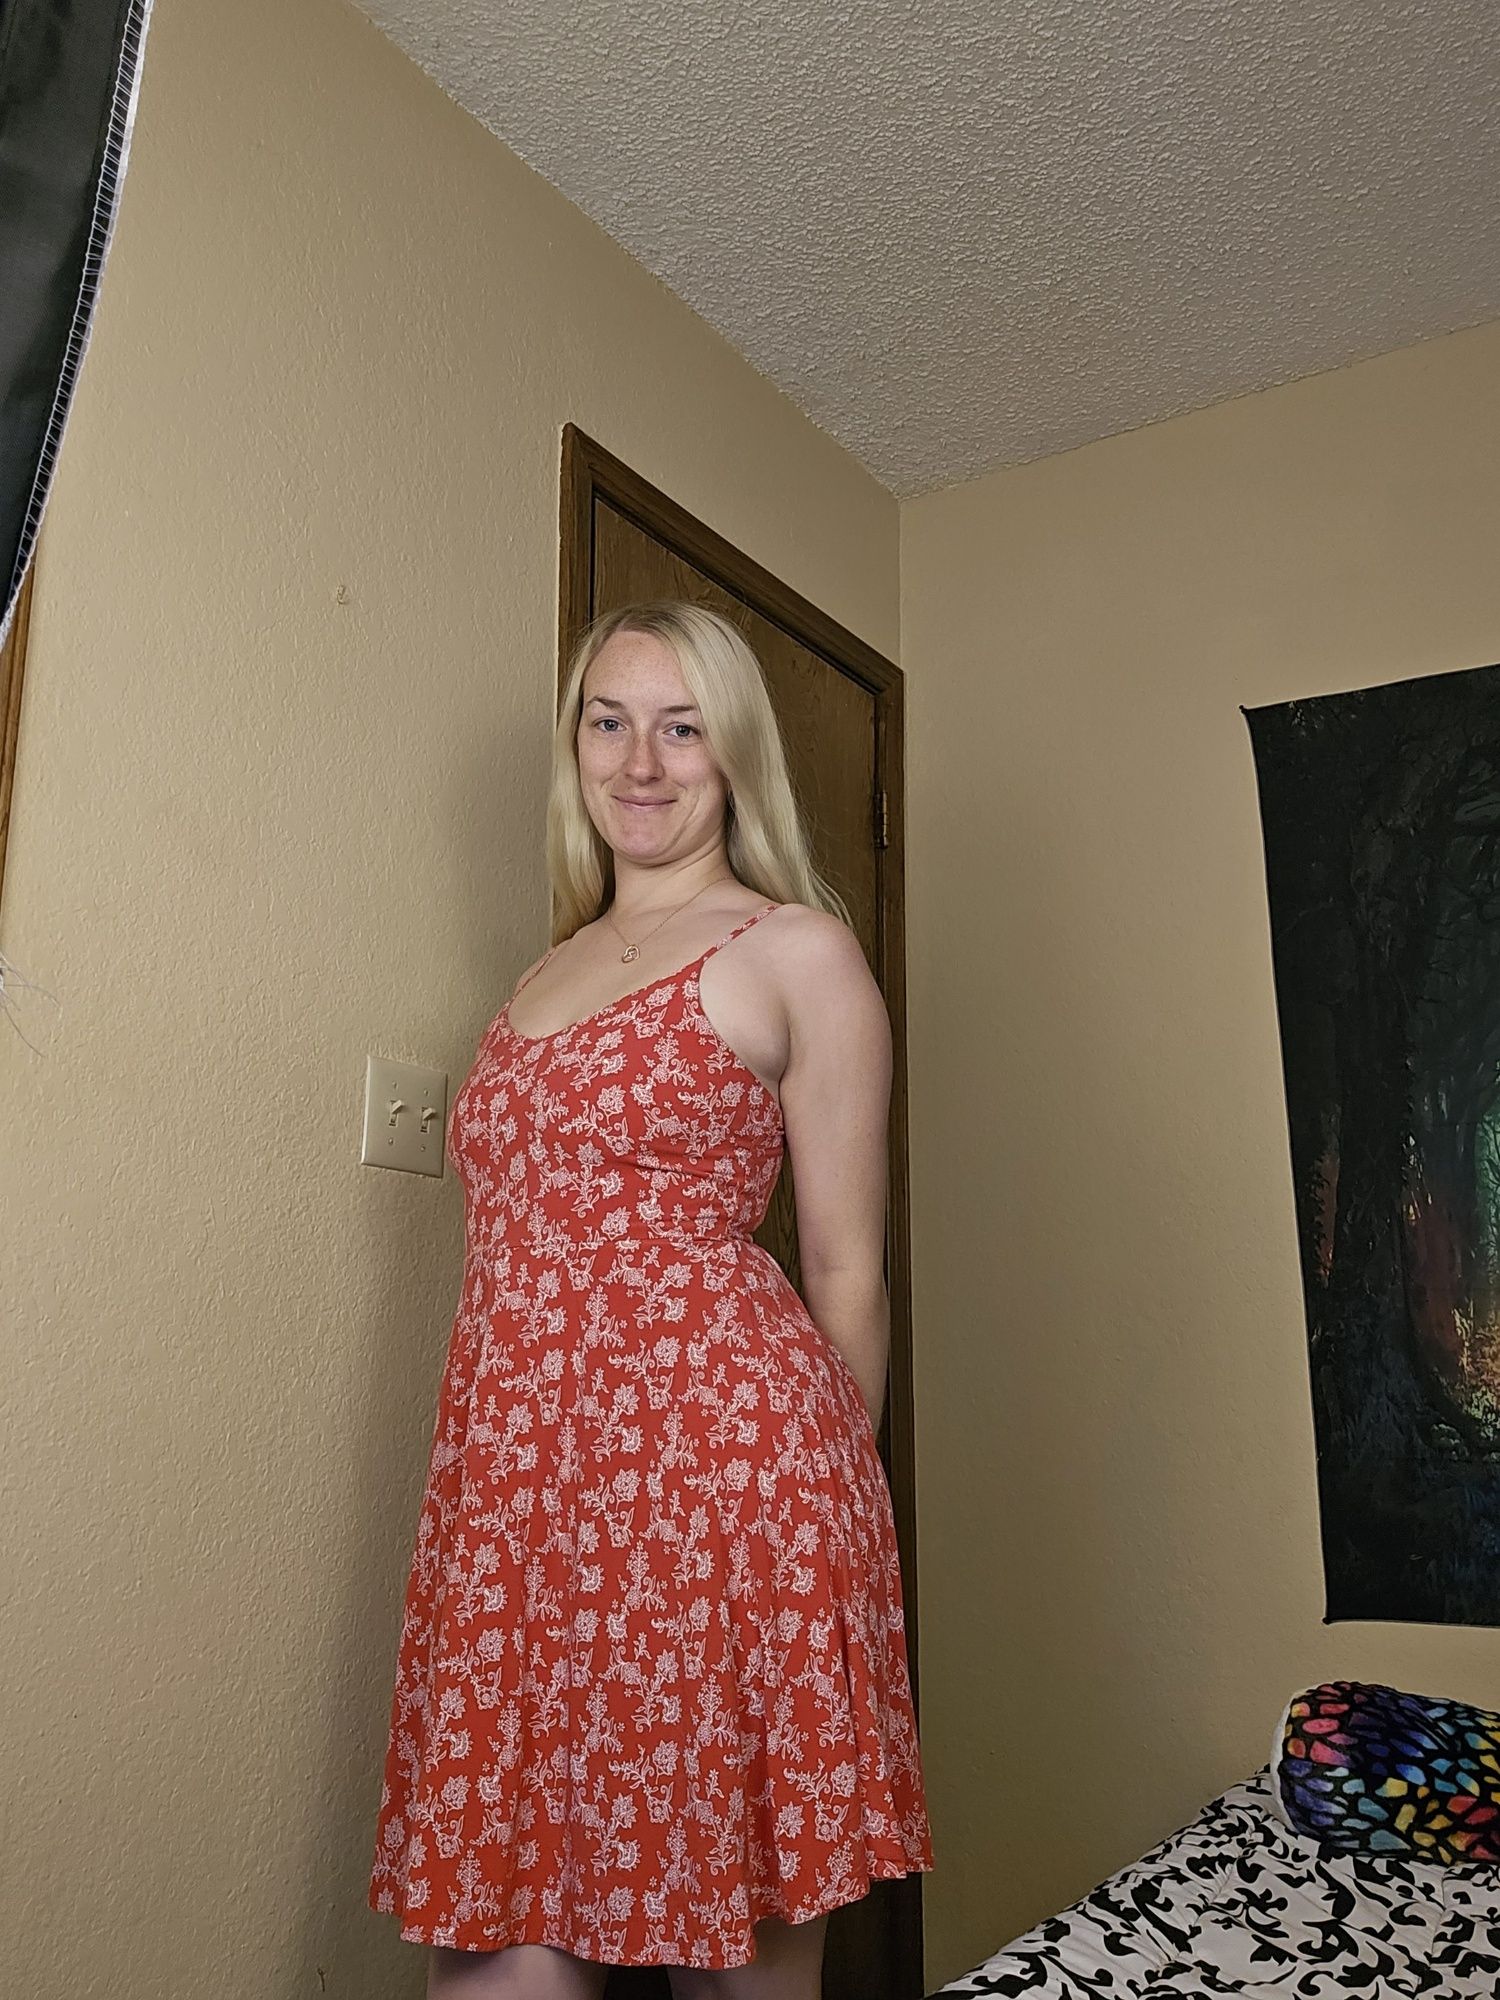 Just another whore in a sundress - Mama_Foxx94